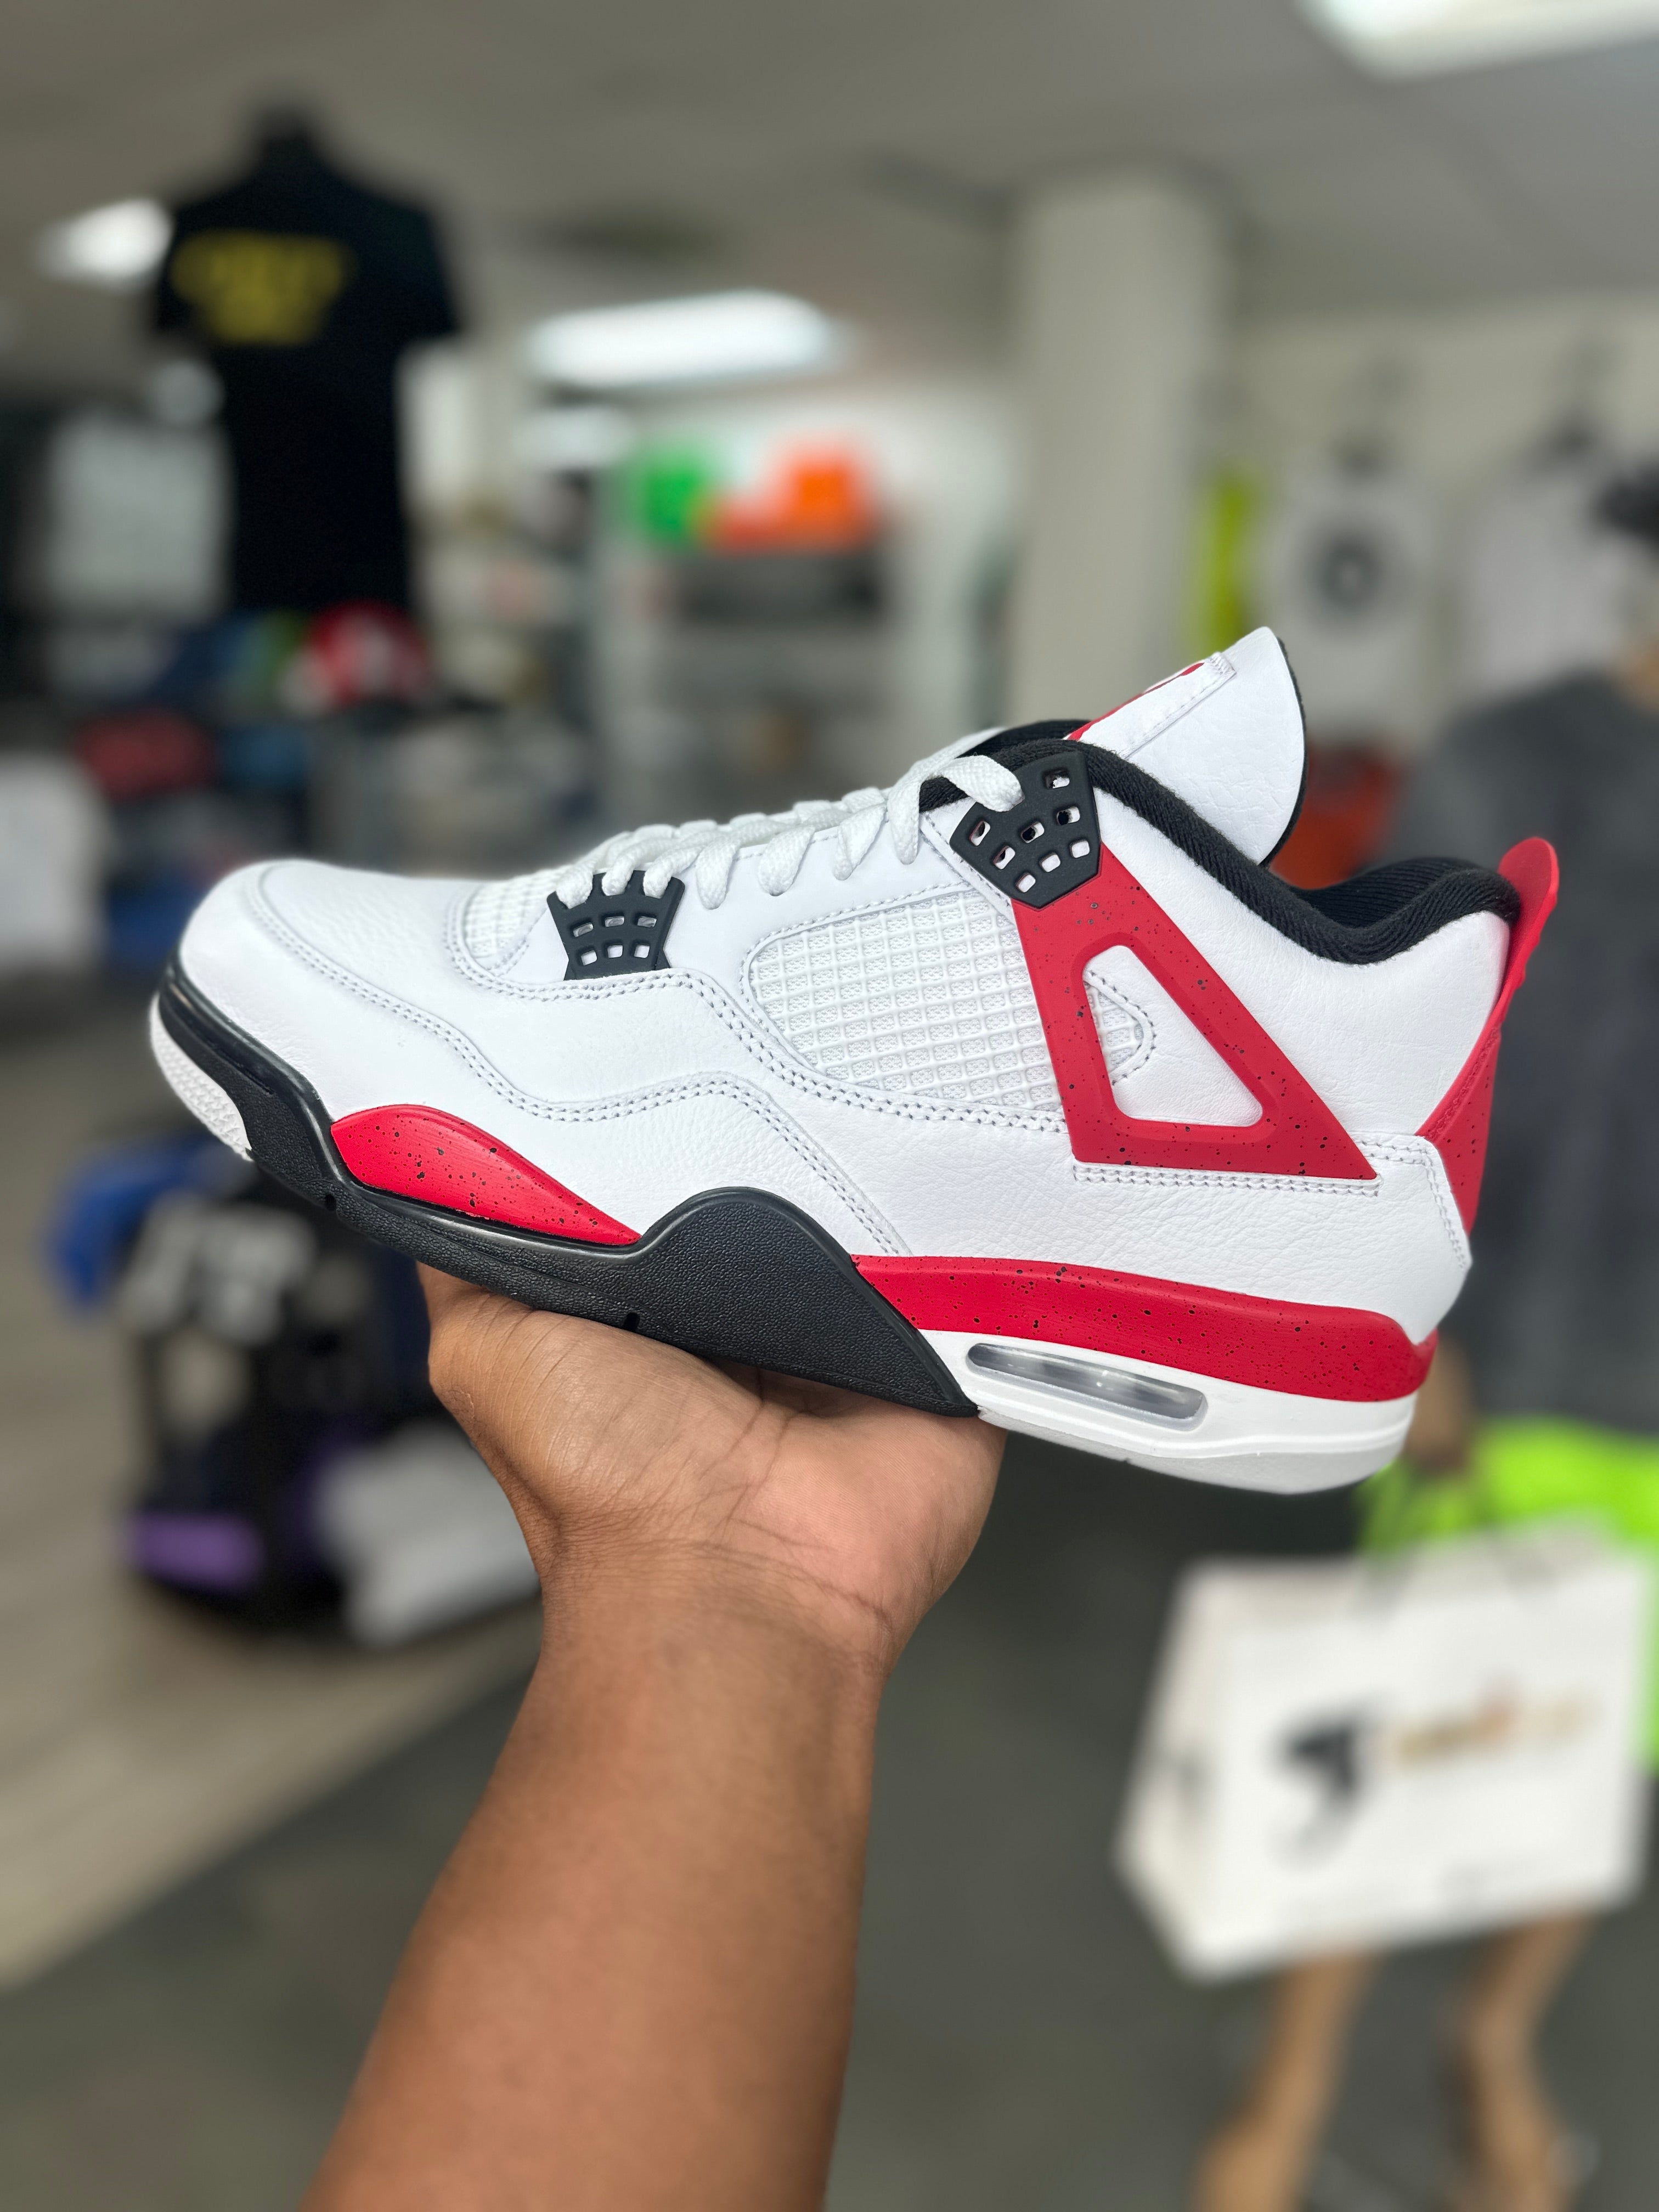 Jordan 4 Retro Red Cement - Luxuries By Luck